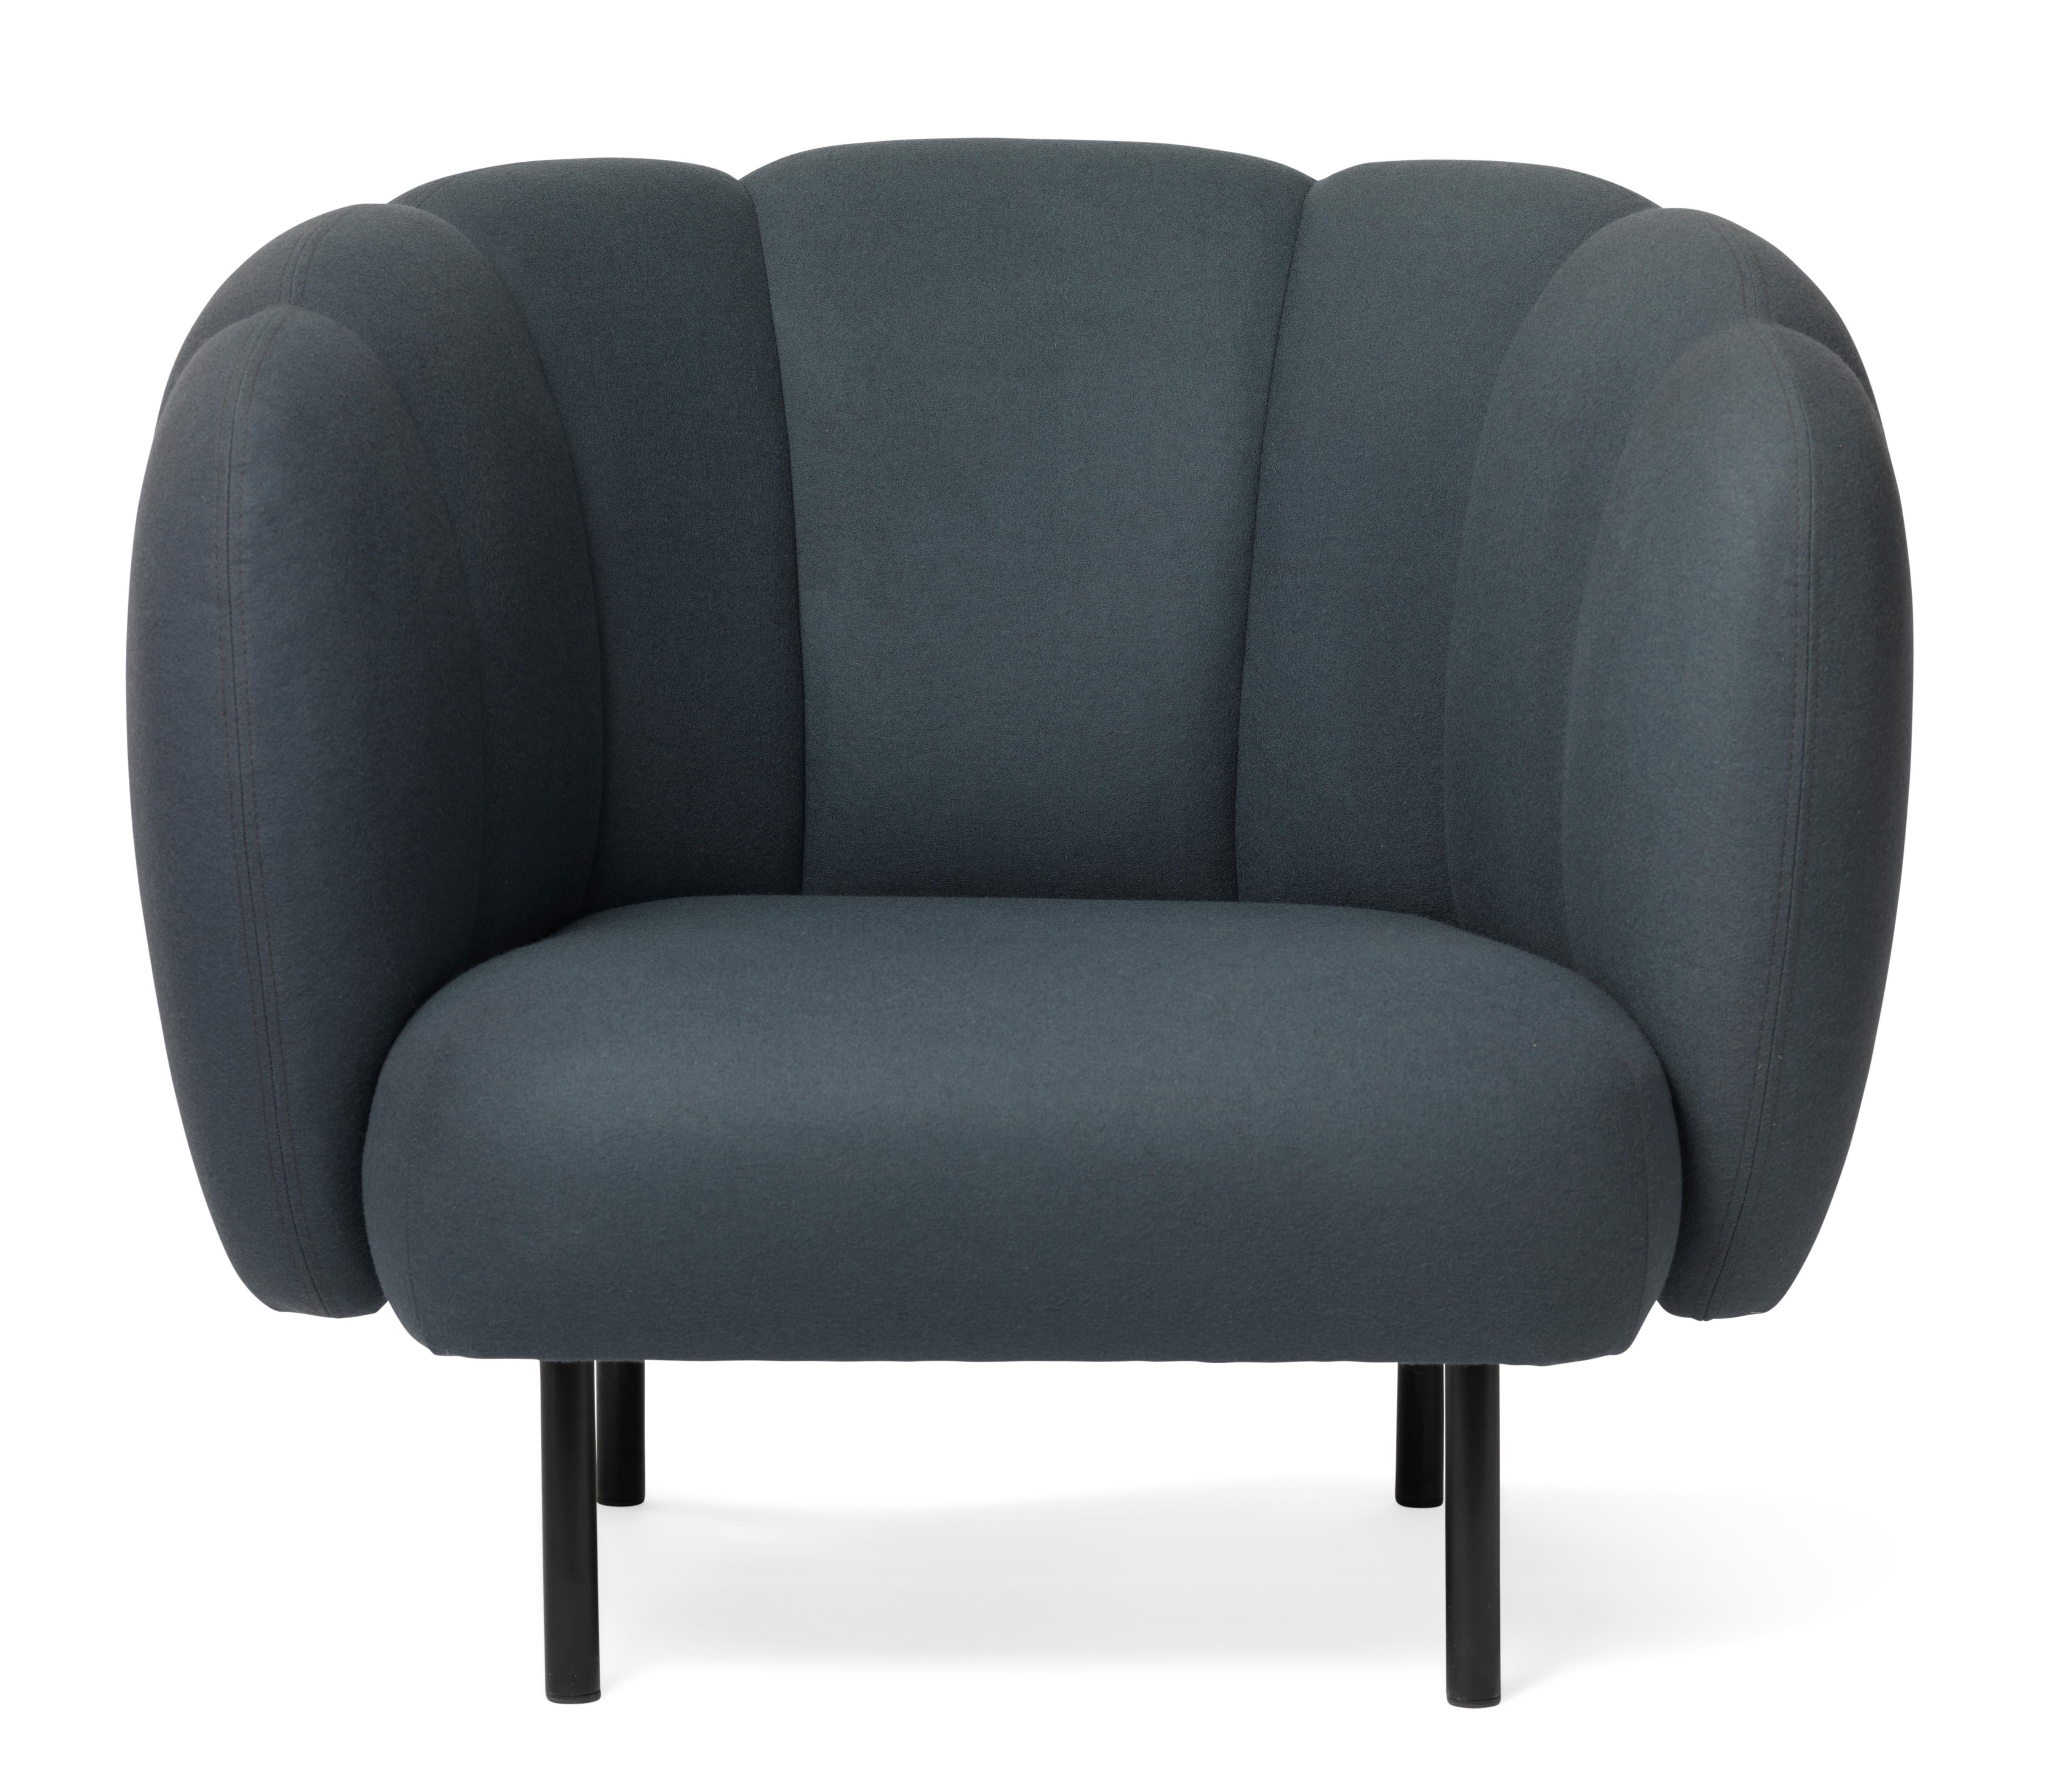 For Sale: Blue (Hero 991) Cape Lounge Chair with Stitches, by Charlotte Høncke from Warm Nordic